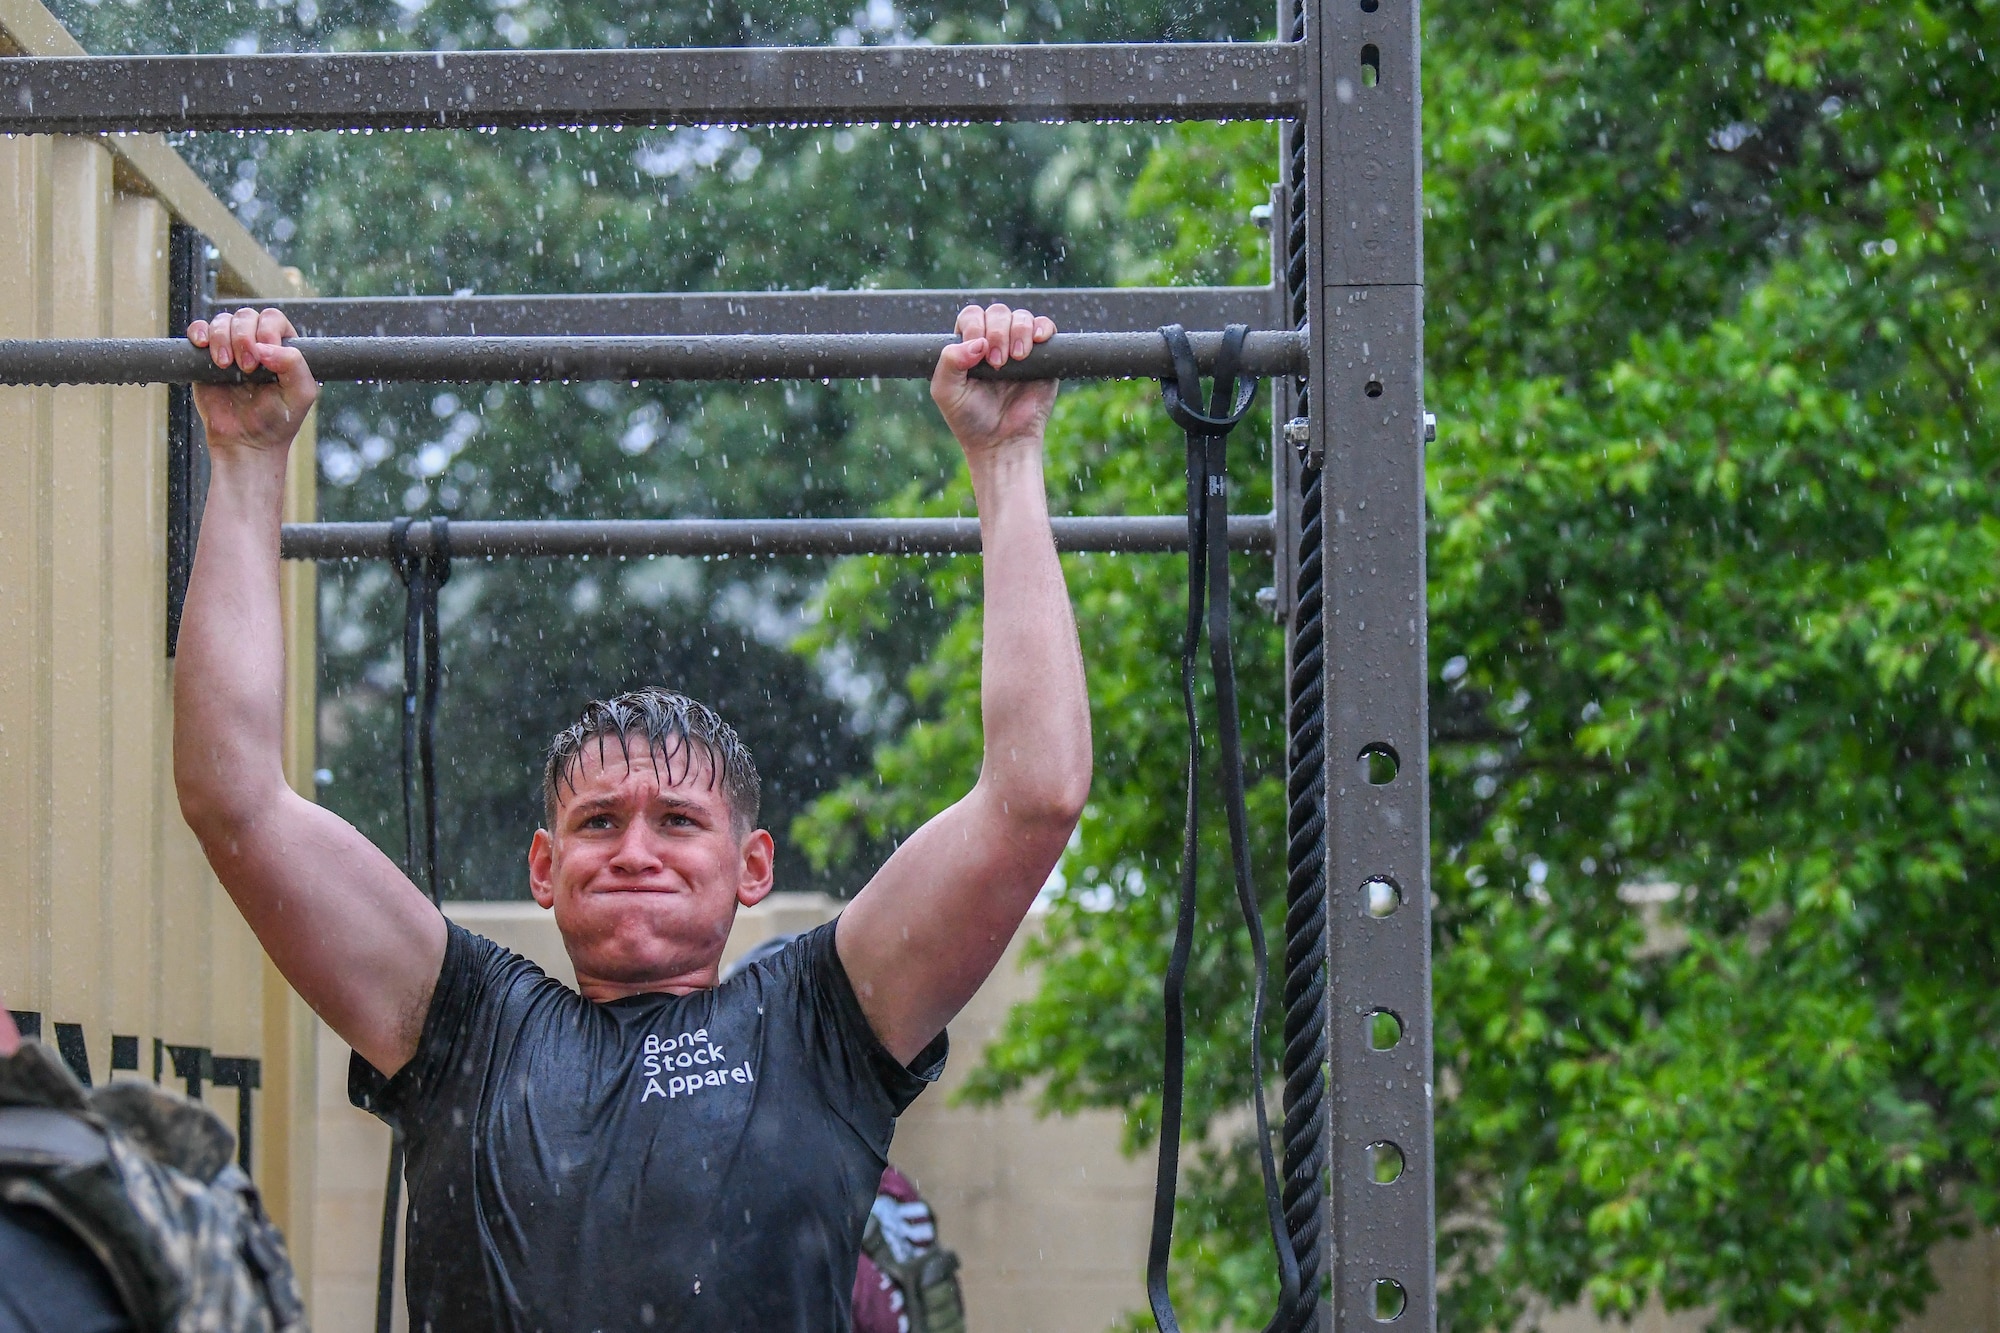 A fitness enthusiast performs pull-ups during a Murph challenge at Yokota Air Base, Japan, May 27, 2022. The Murph challenge memorializes U.S. Navy SEAL Lt. Michael P. Murphy who received the Medal of Honor for his actions during the war in Afghanistan. He was the first member of the United States Navy to receive the award since the Vietnam War. (U.S. Air Force photo by Staff Sgt. Jessica Avallone)